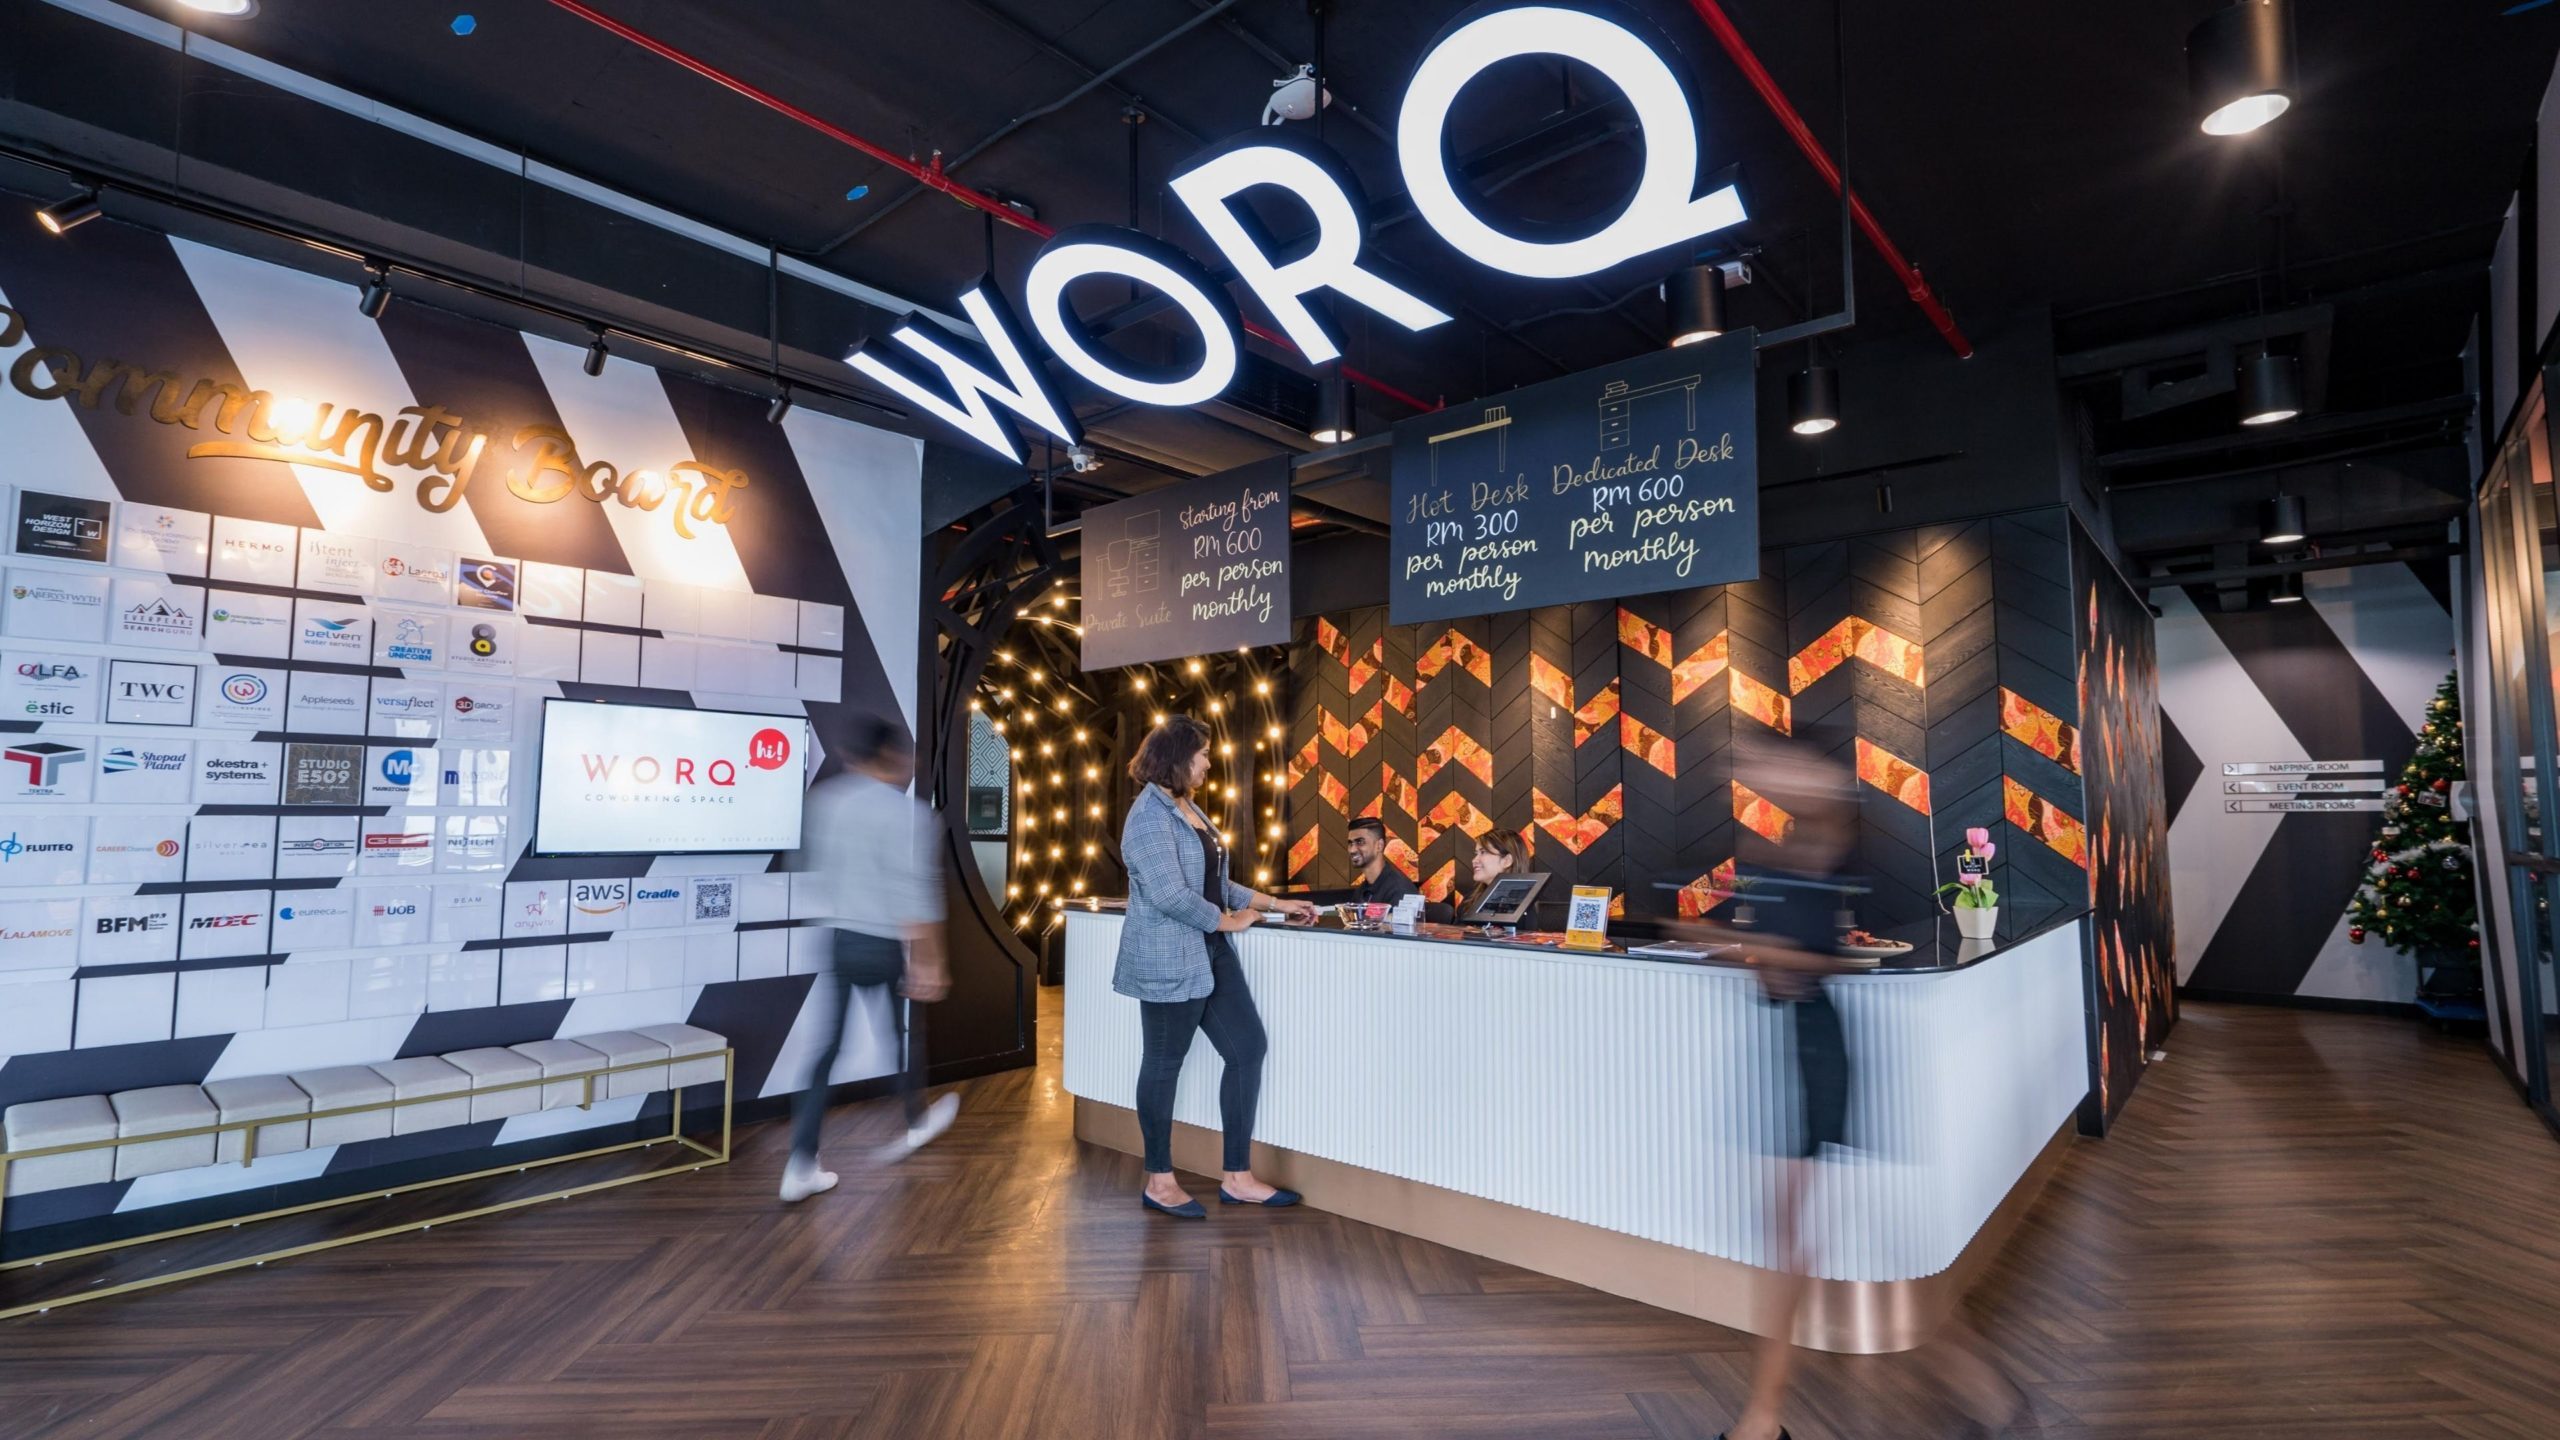 Malaysian co-working space WORQ raises $2.4m from seven investors